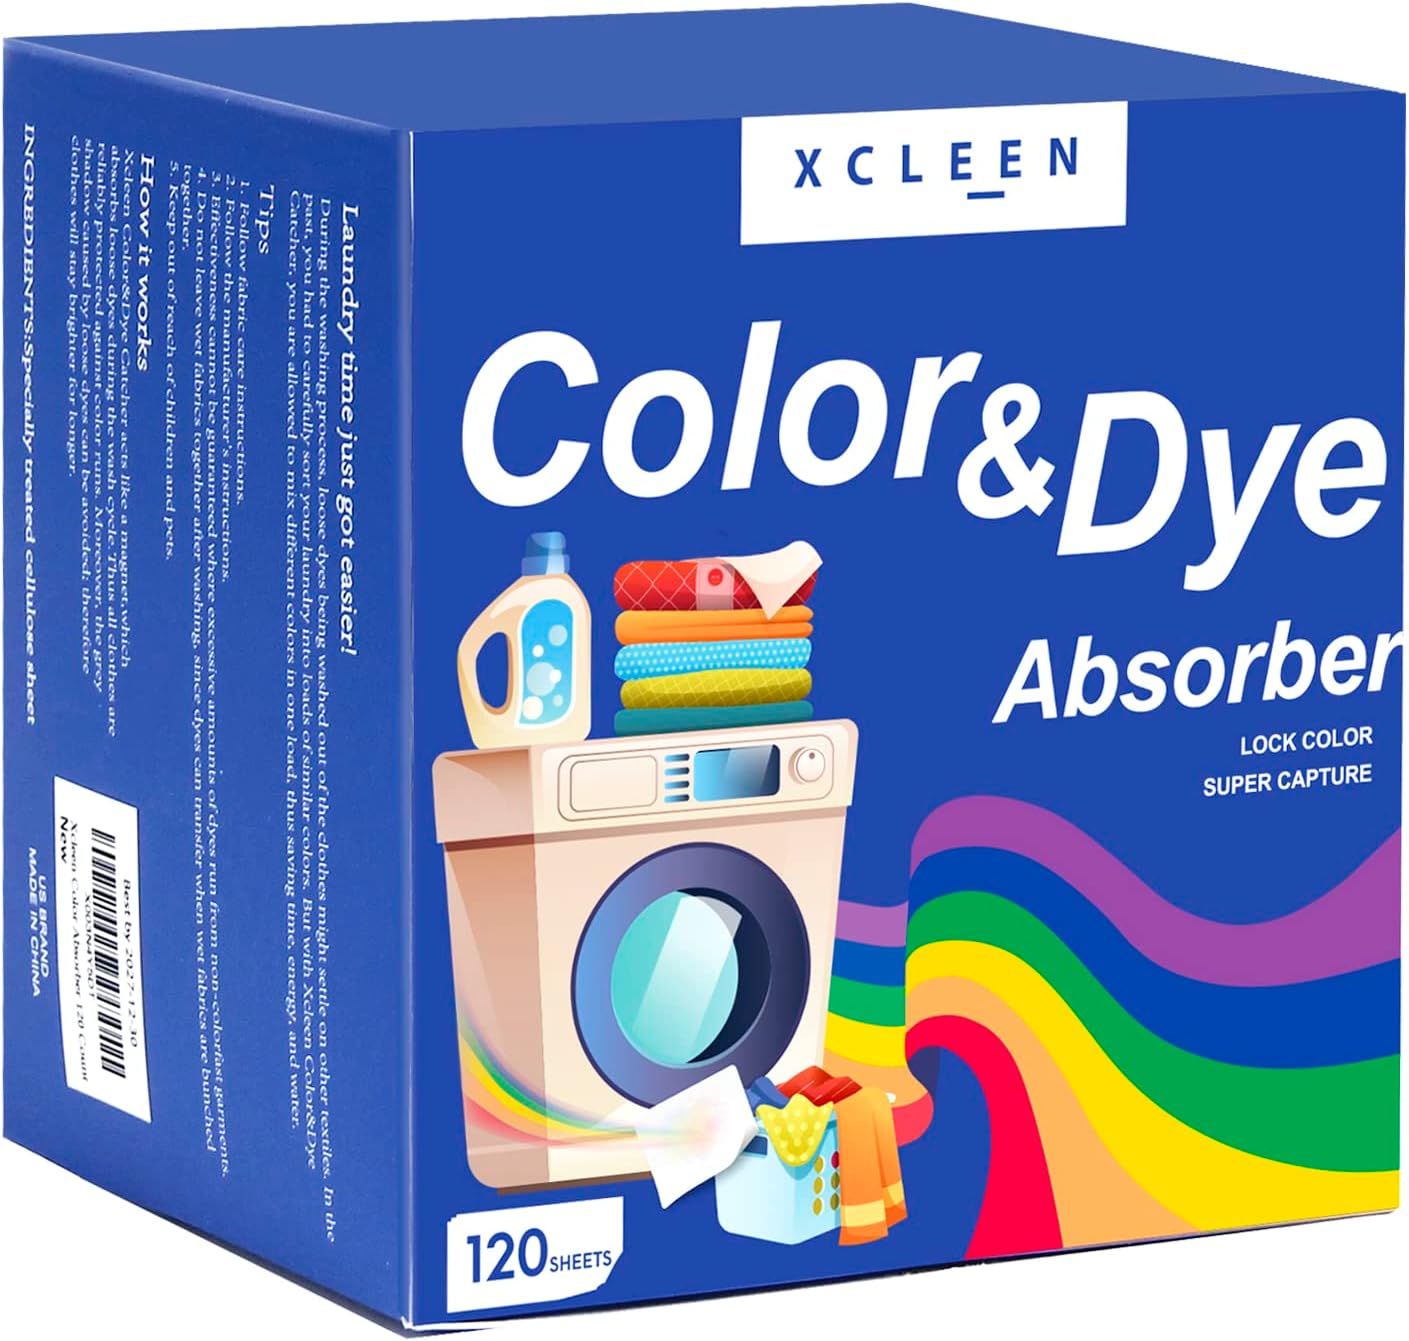 Color Absorber Laundry Sheets 120 Count, Dye Catcher to Prevent Clothes from Smearing, Fragrance Free Color Trapping Sheets for Home School or Apartment